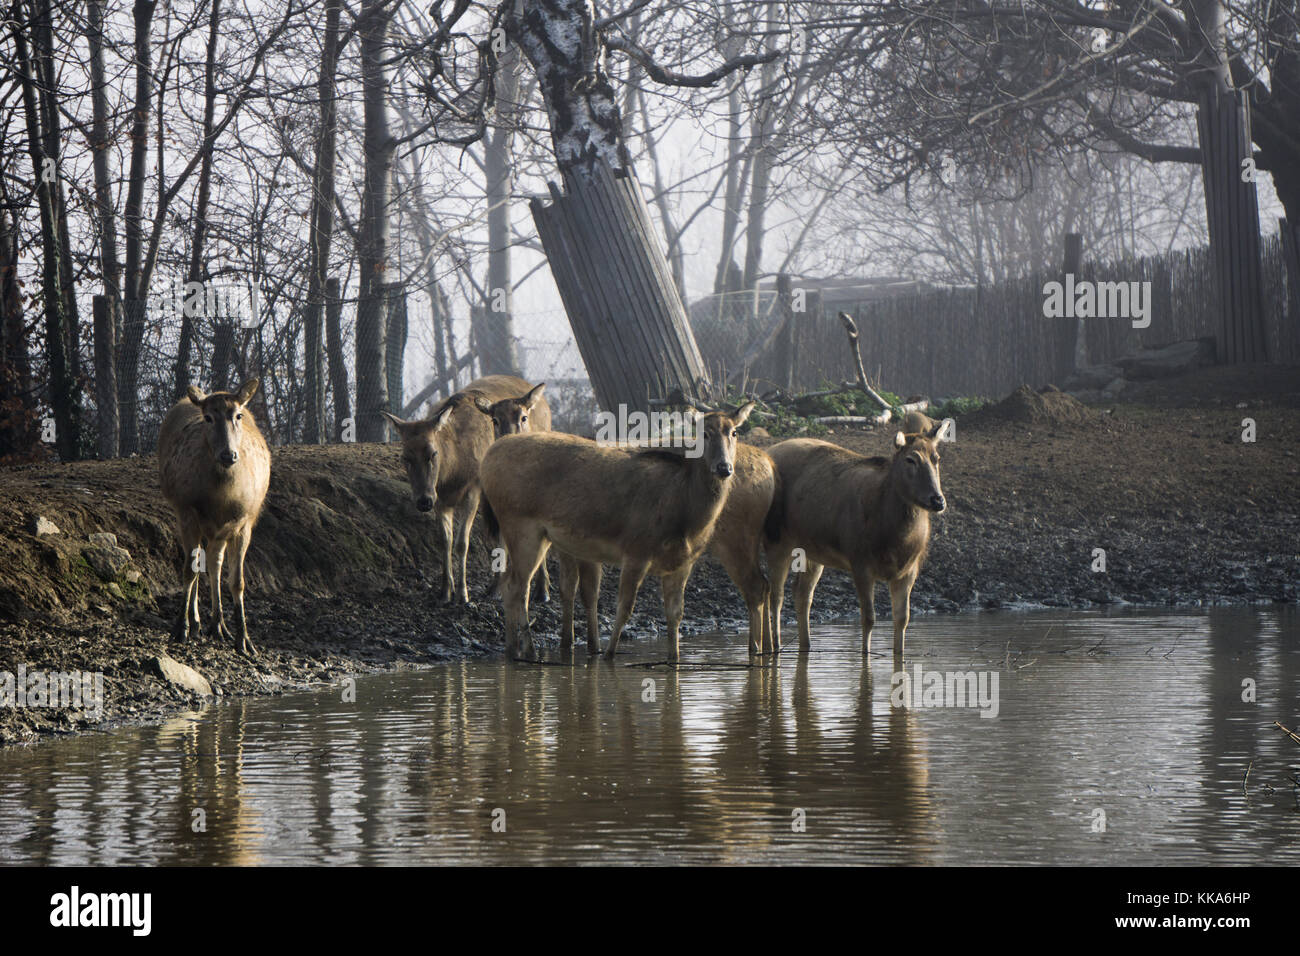 Père David's deer looking alert at the watering hole inside their enclosure at the zoo Stock Photo